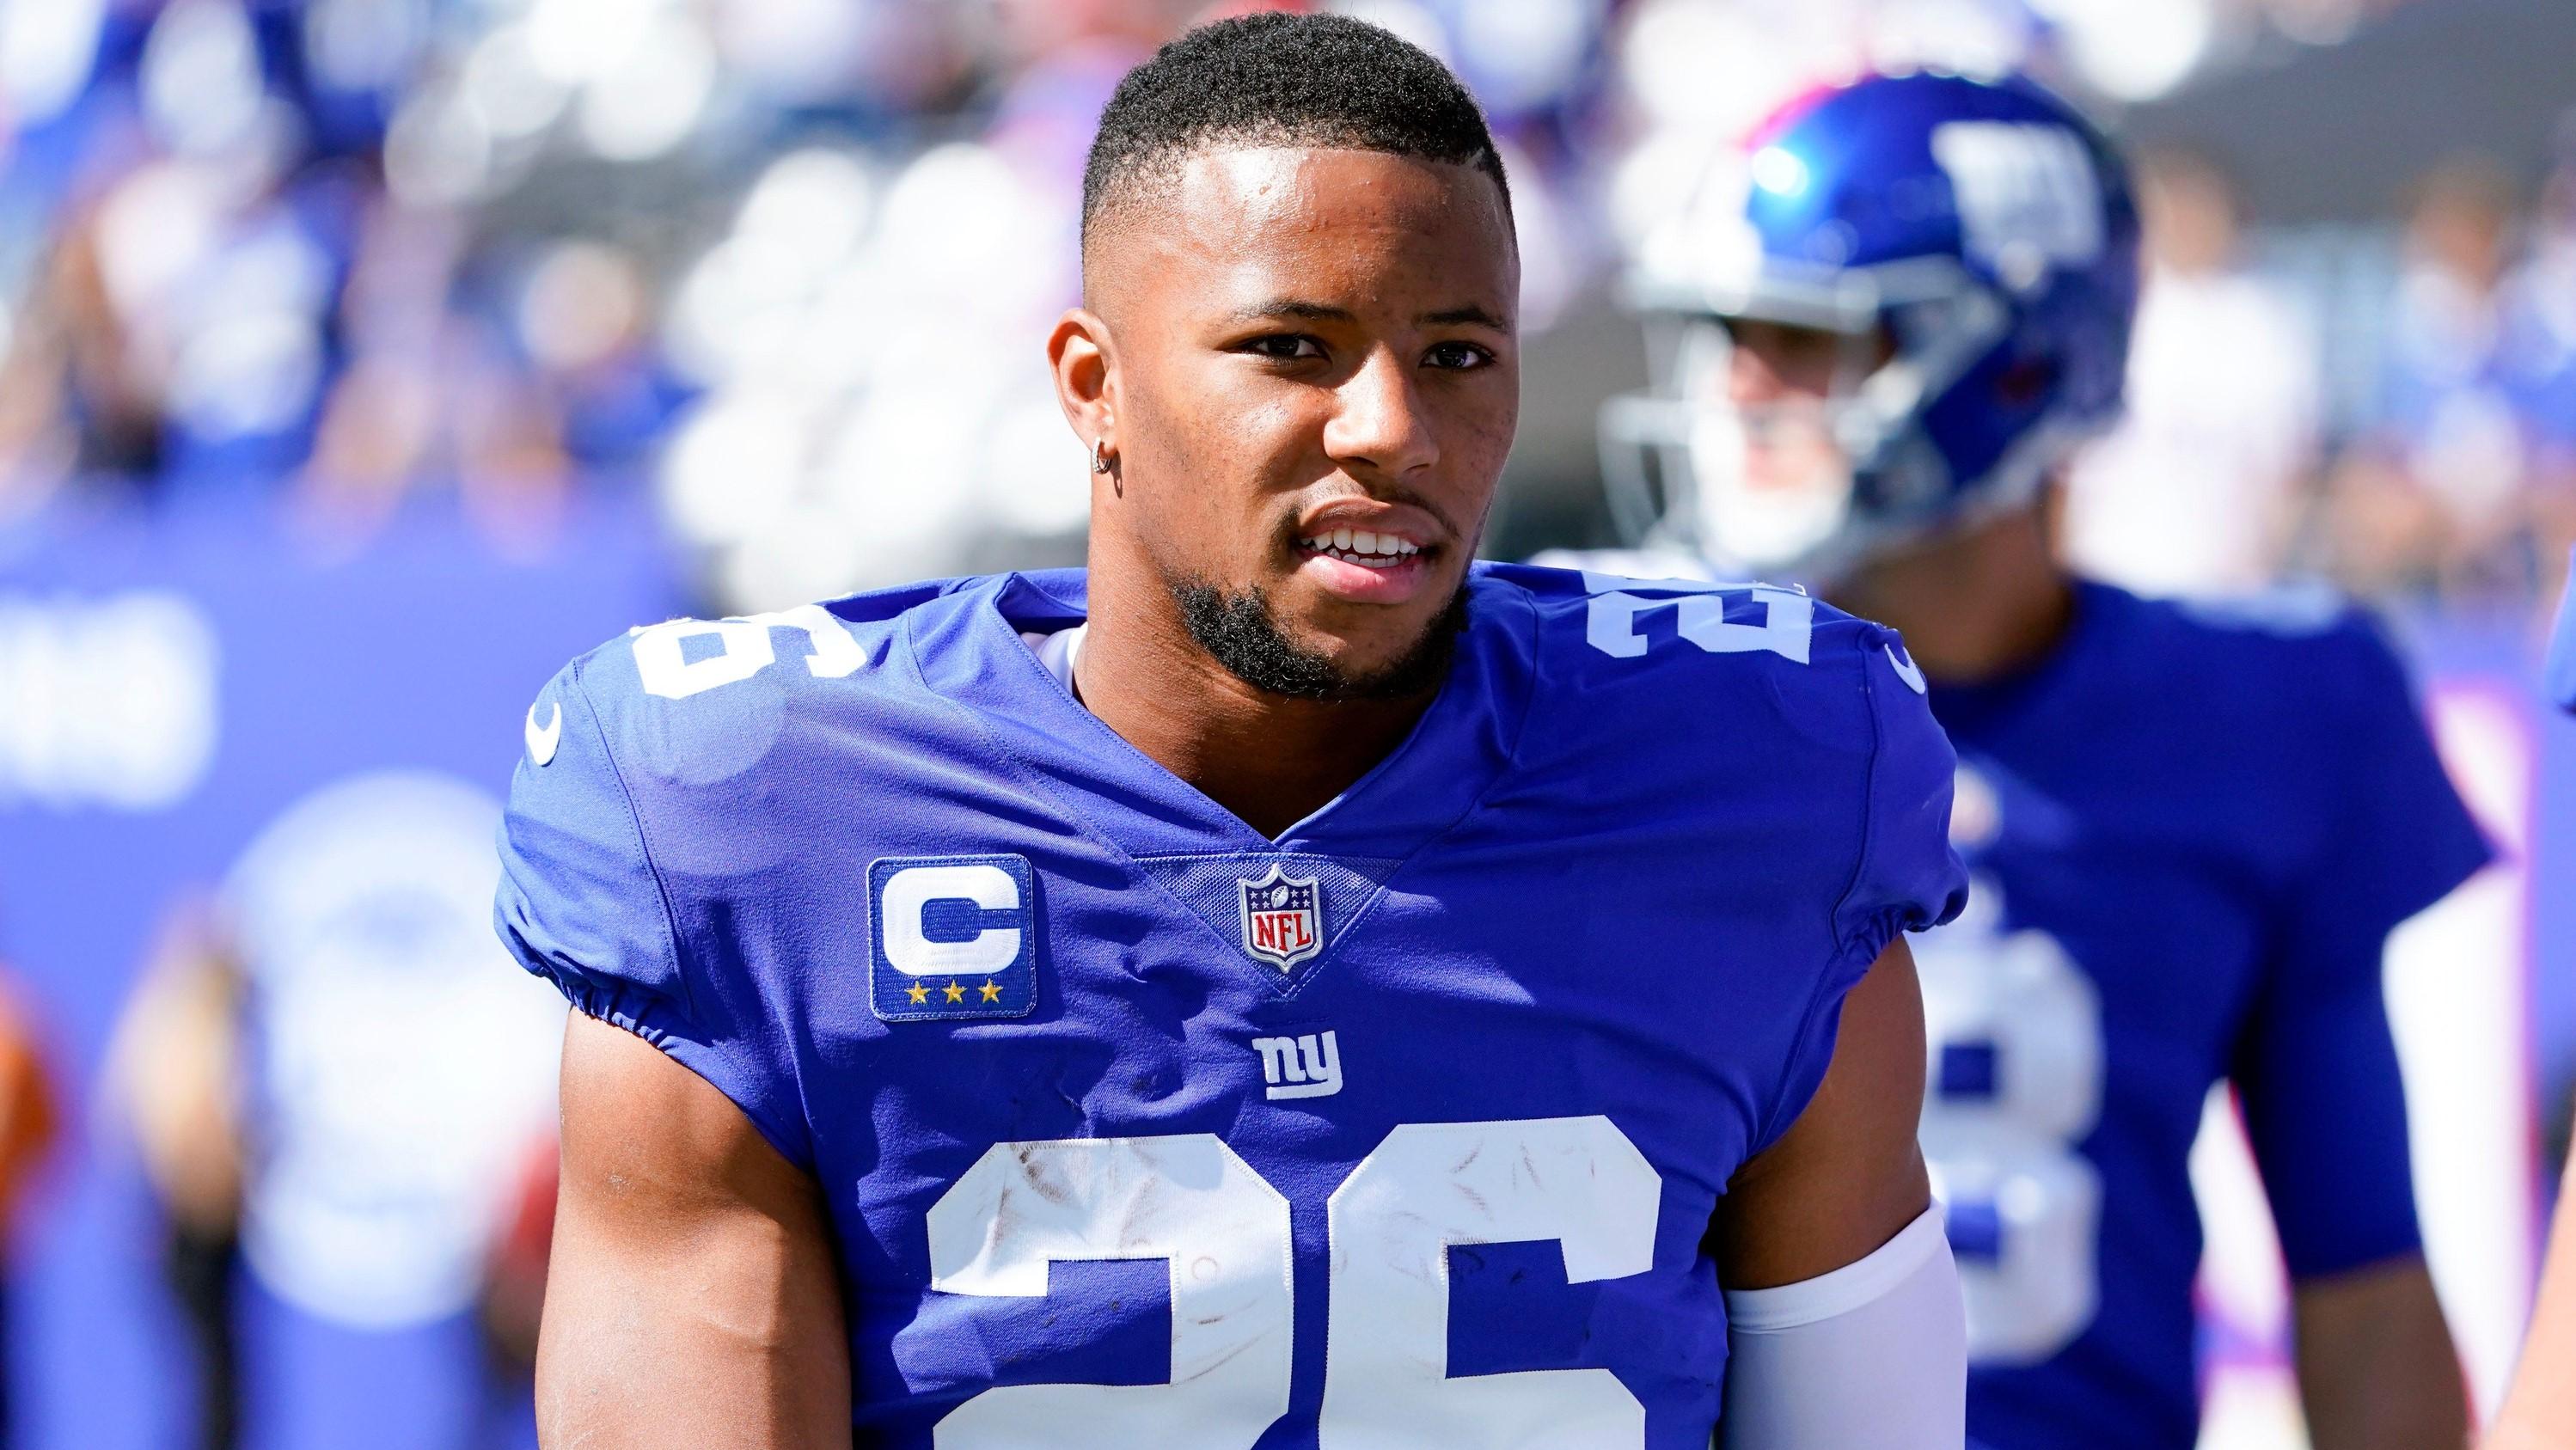 New York Giants running back Saquon Barkley (26) on the field before the game at MetLife Stadium on Sunday, Sept. 26, 2021, in East Rutherford. / Danielle Parhizkaran/NorthJersey.com